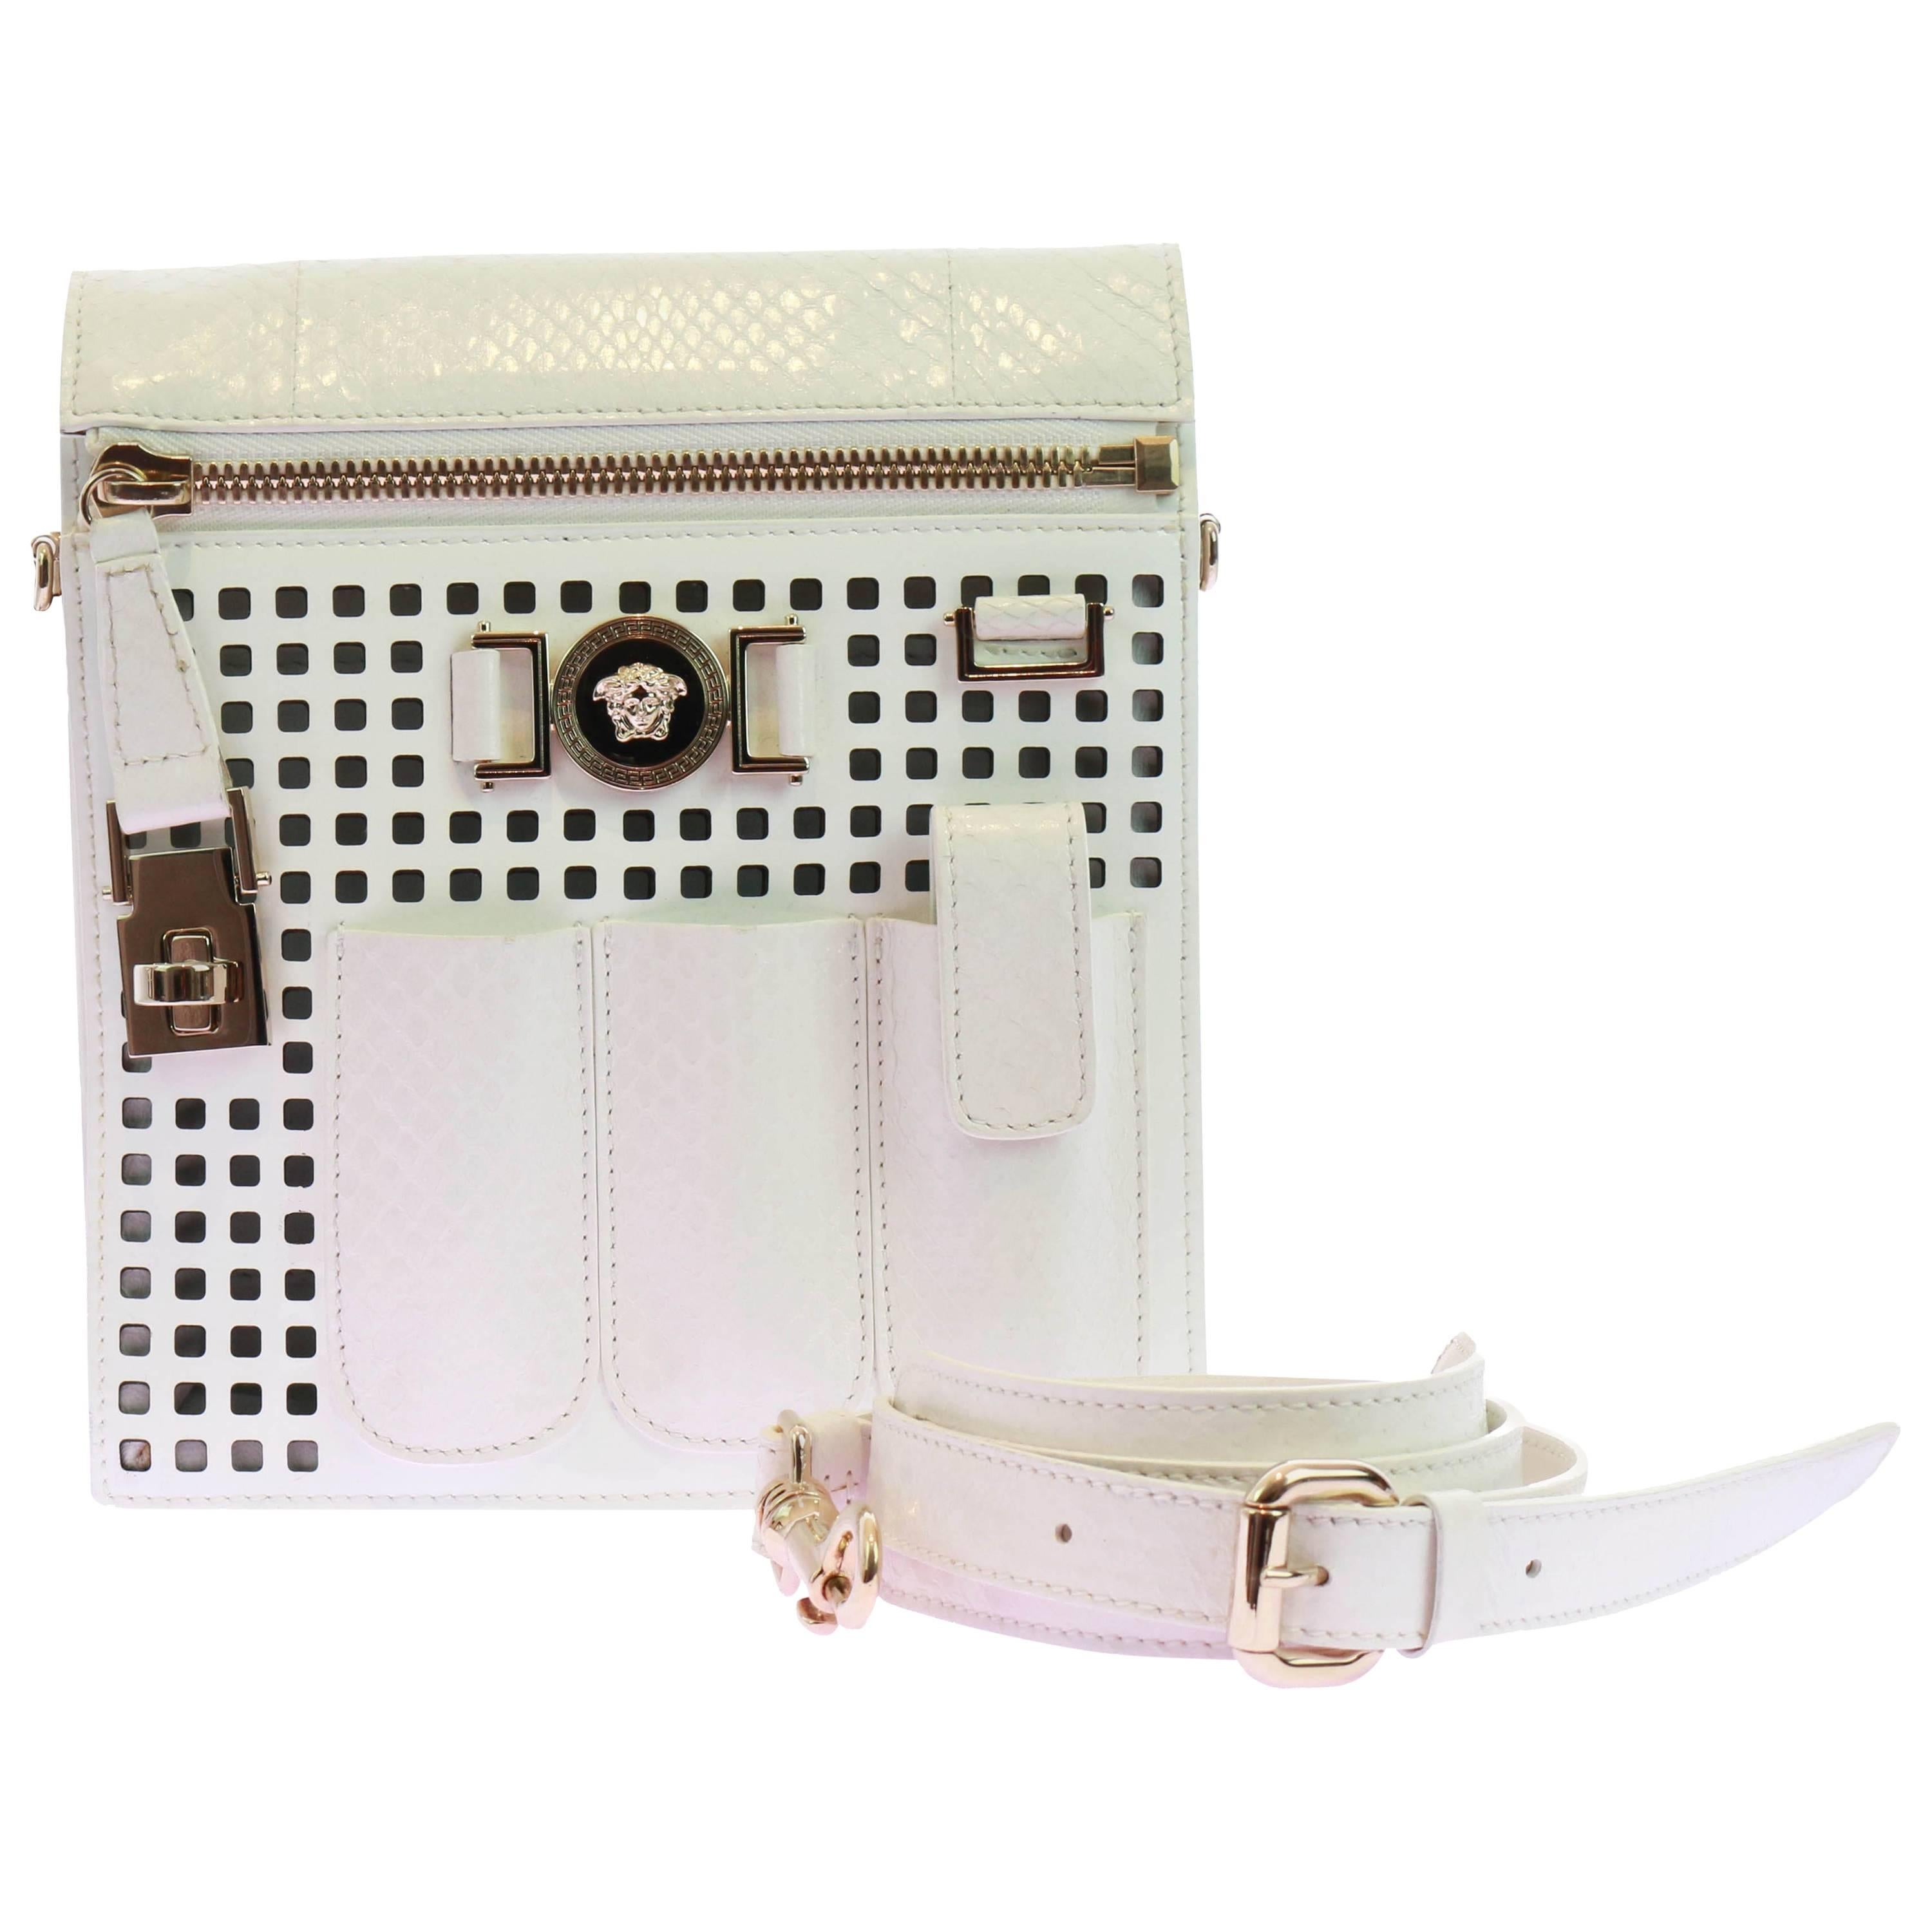 New VERSACE PERFORATED PATENT LEATHER WHITE CROSSBODY BAG For Sale